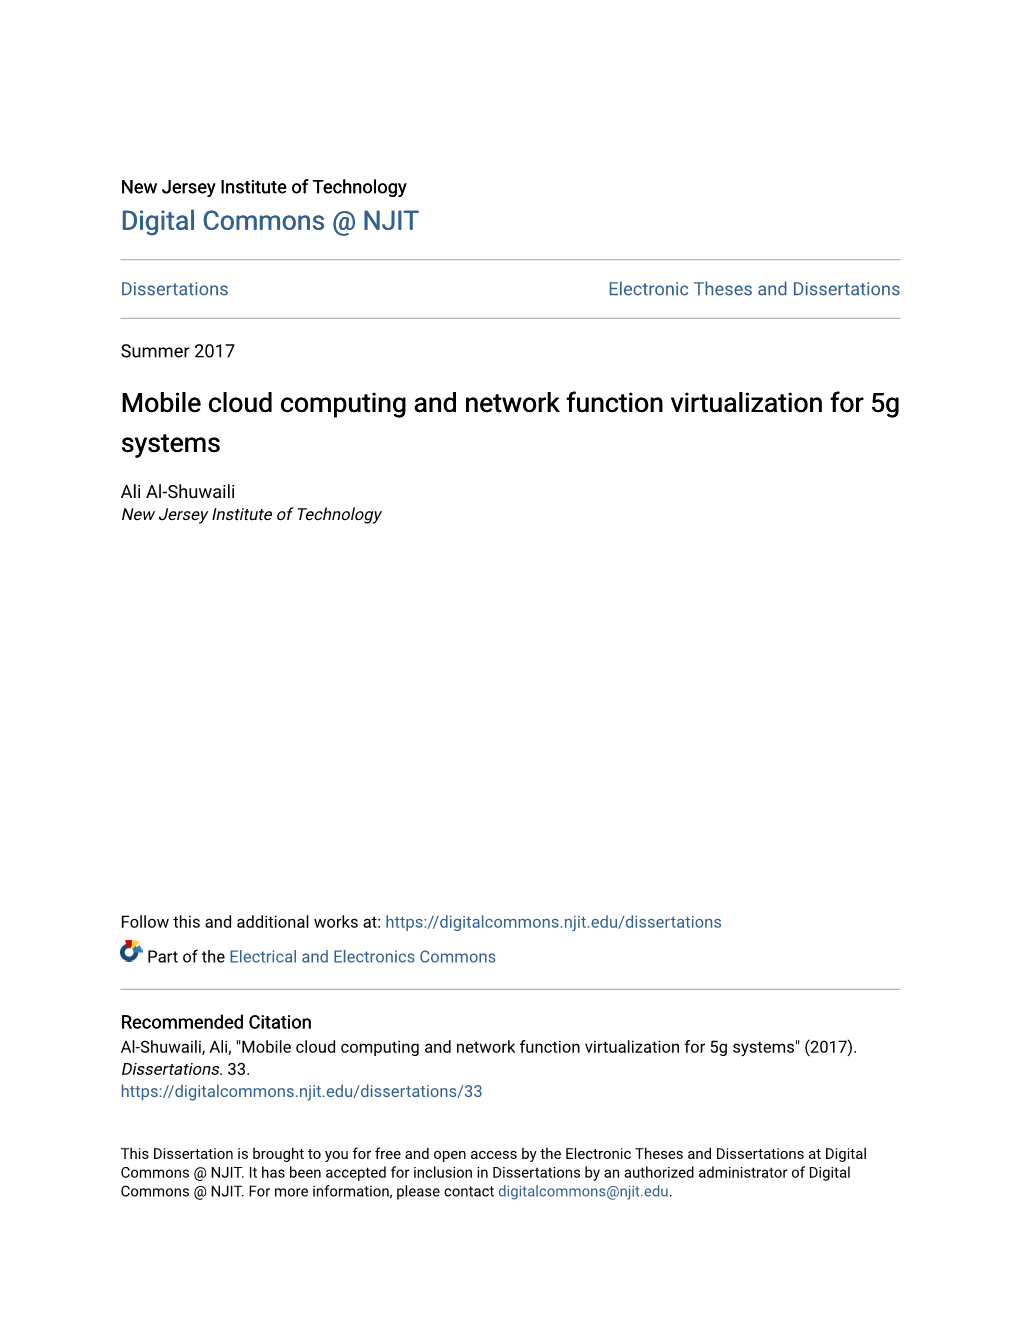 Mobile Cloud Computing and Network Function Virtualization for 5G Systems